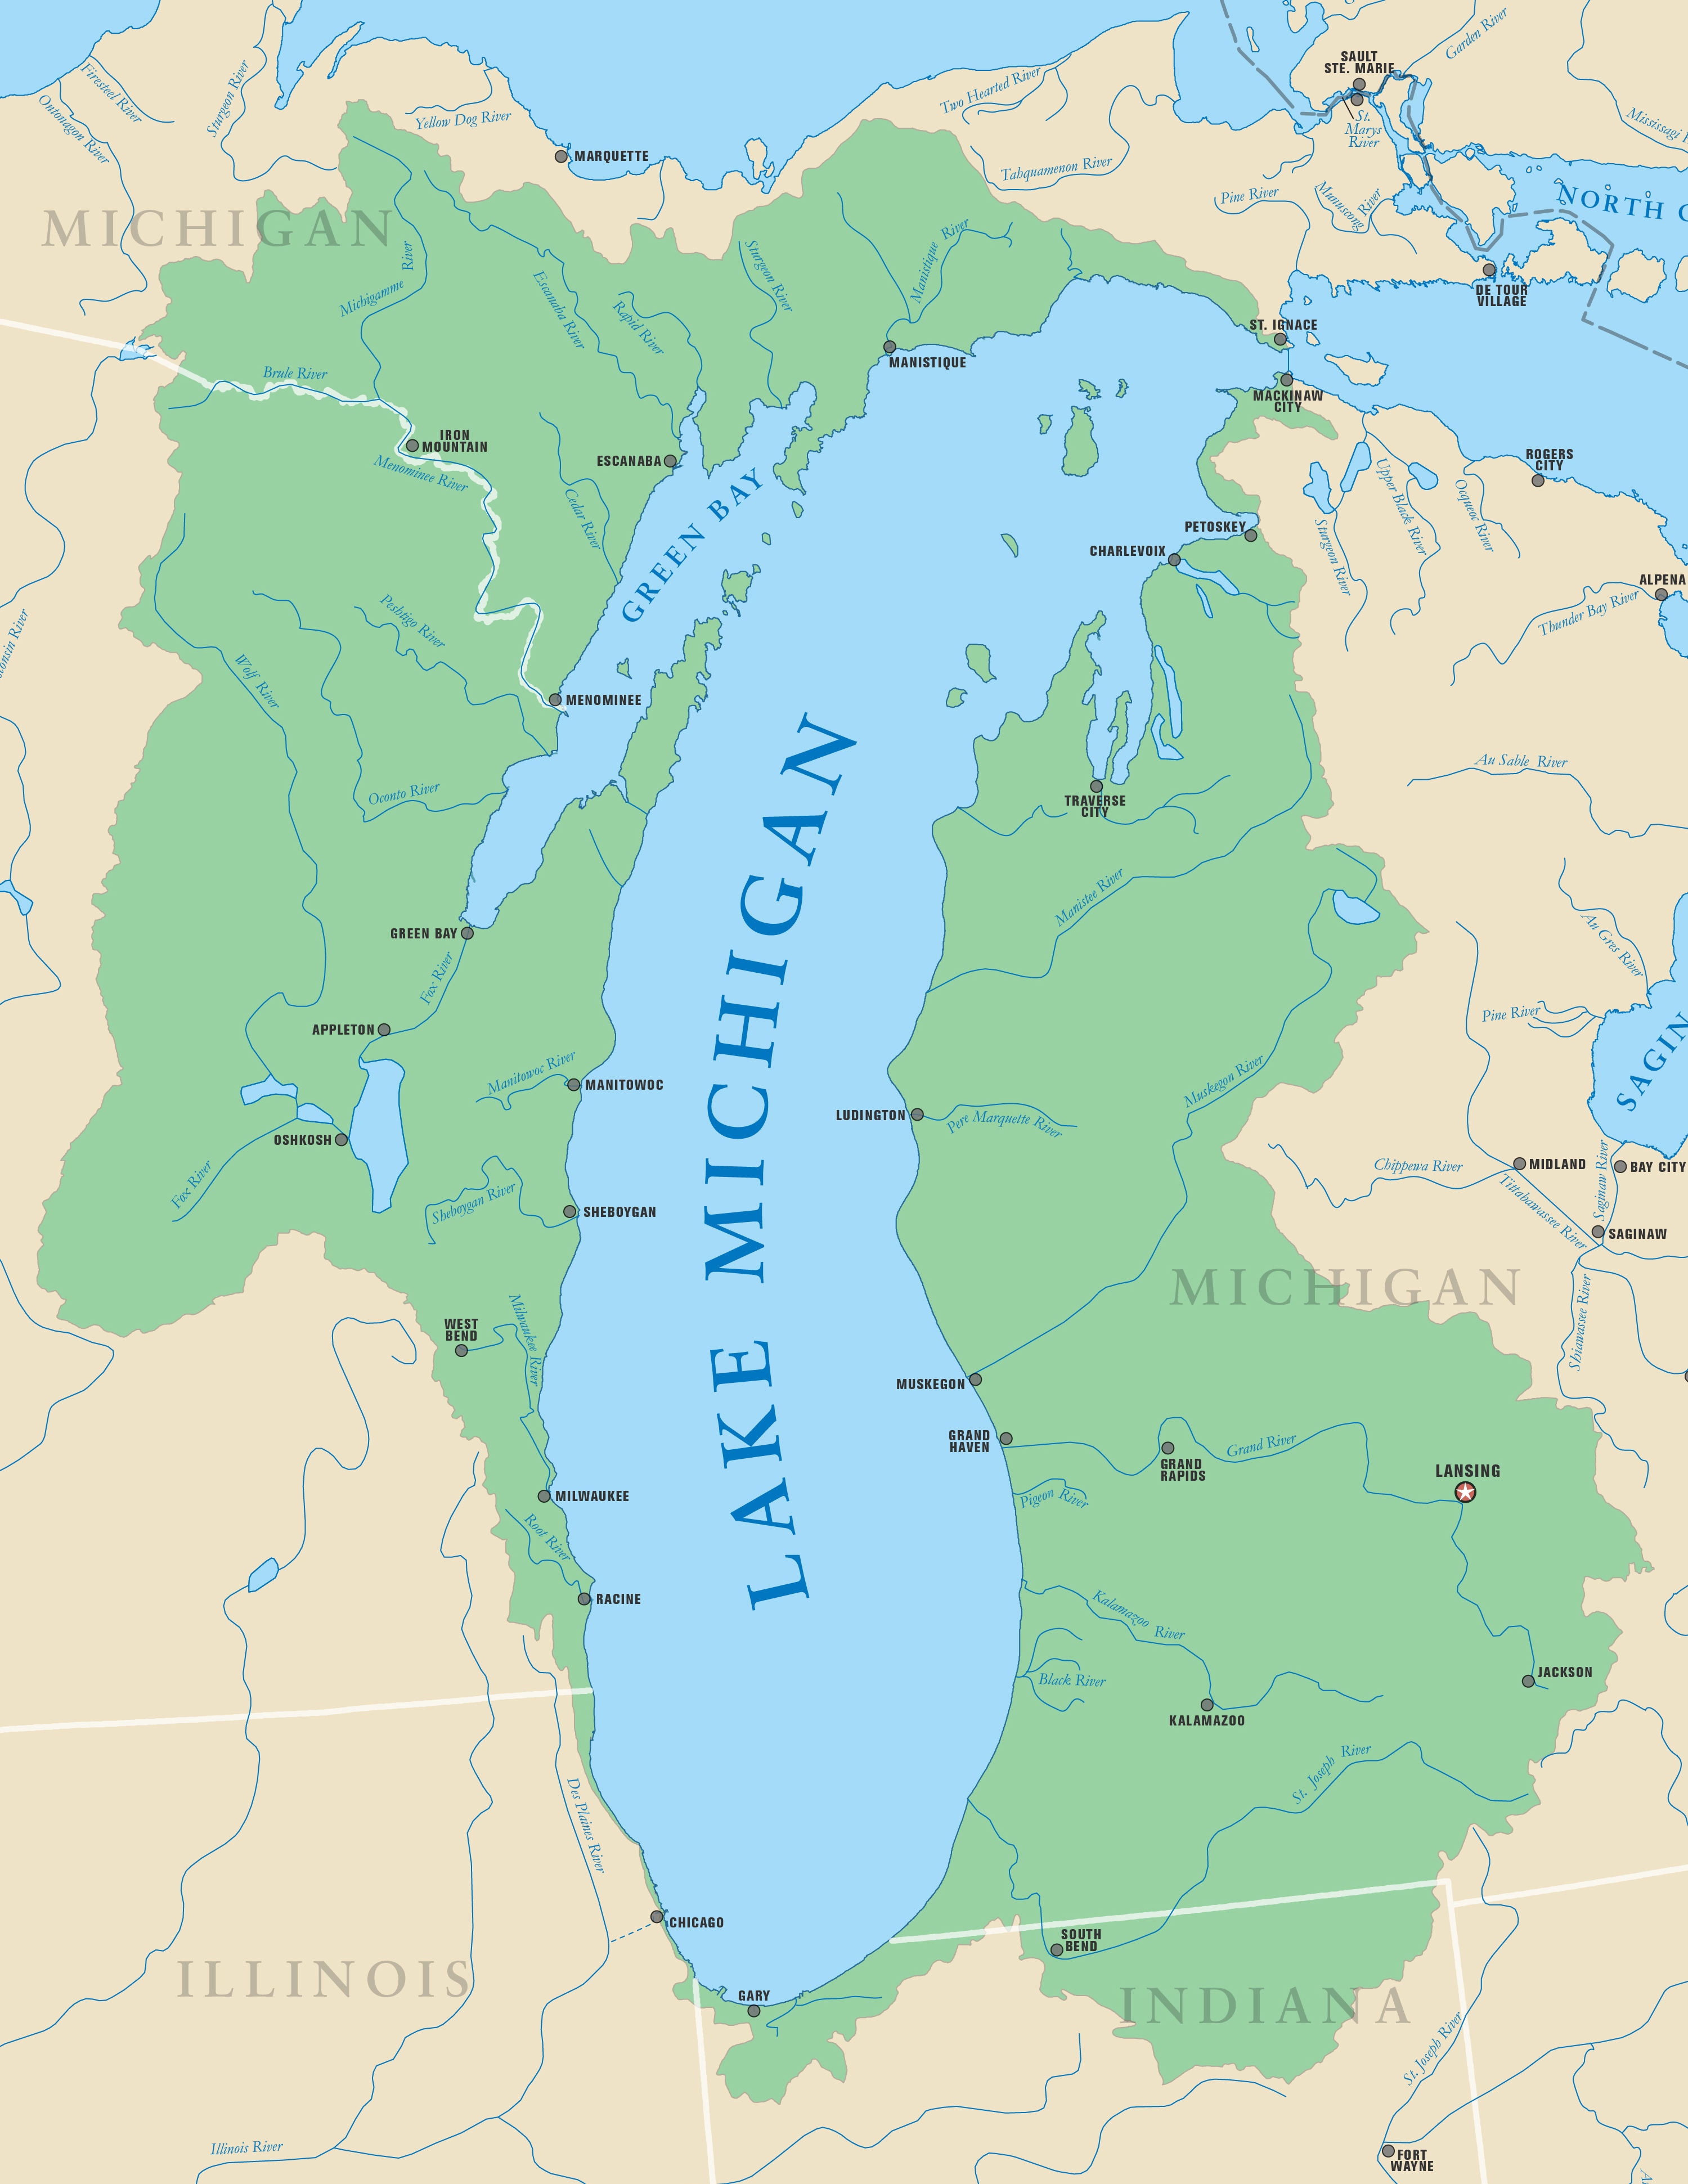 How many Great Lakes are there?